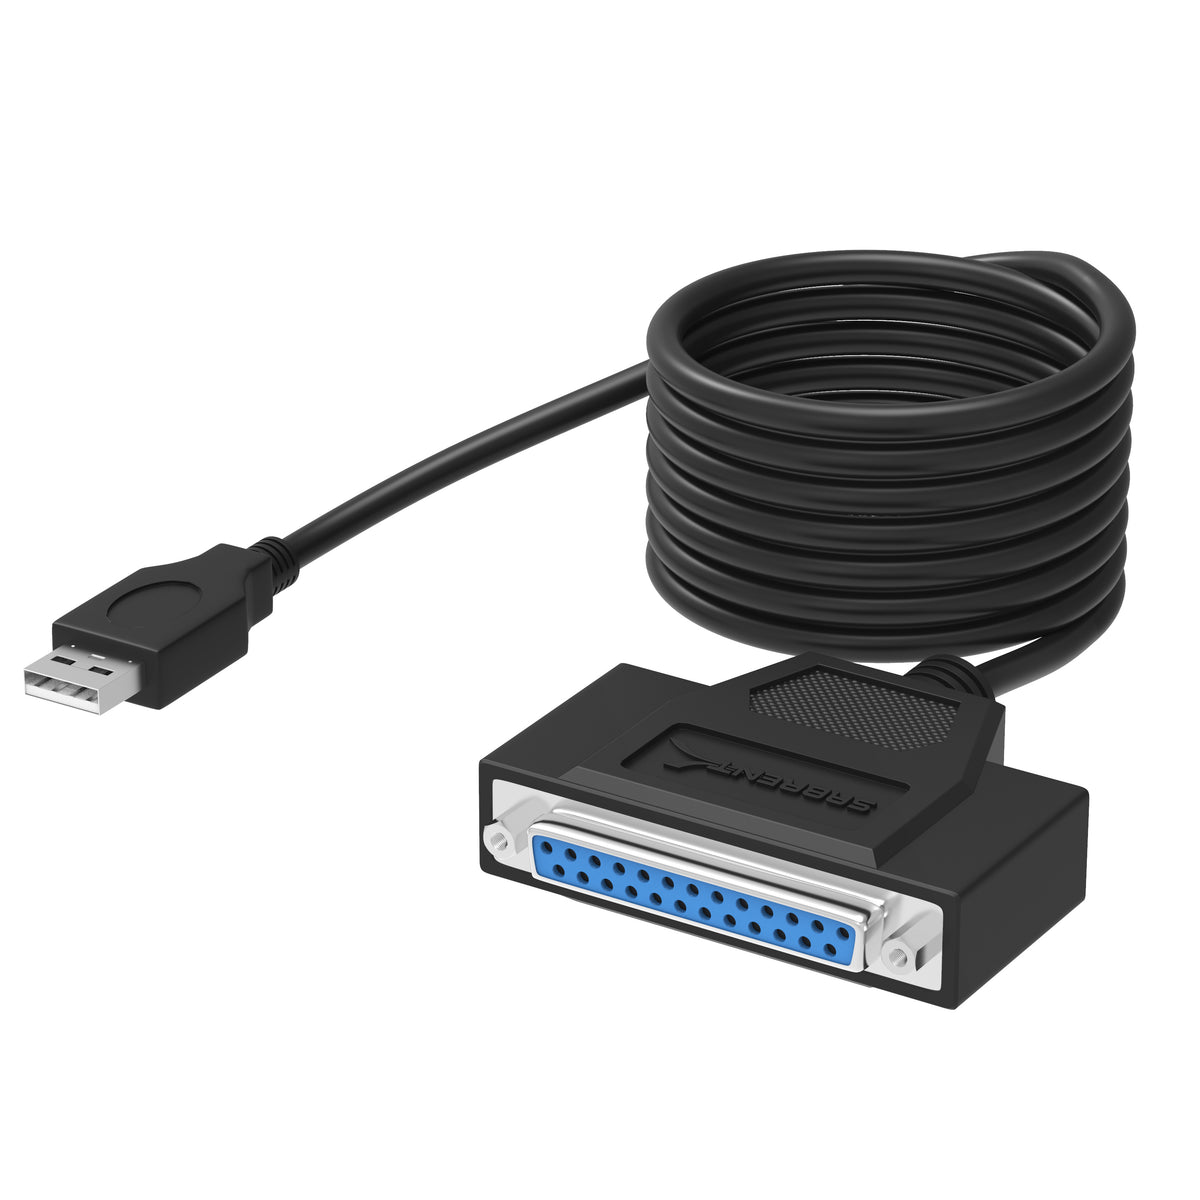 USB 2.0 To DB25 IEEE-1284 Parallel Printer Cable Adapter [HEXNUT Connectors]